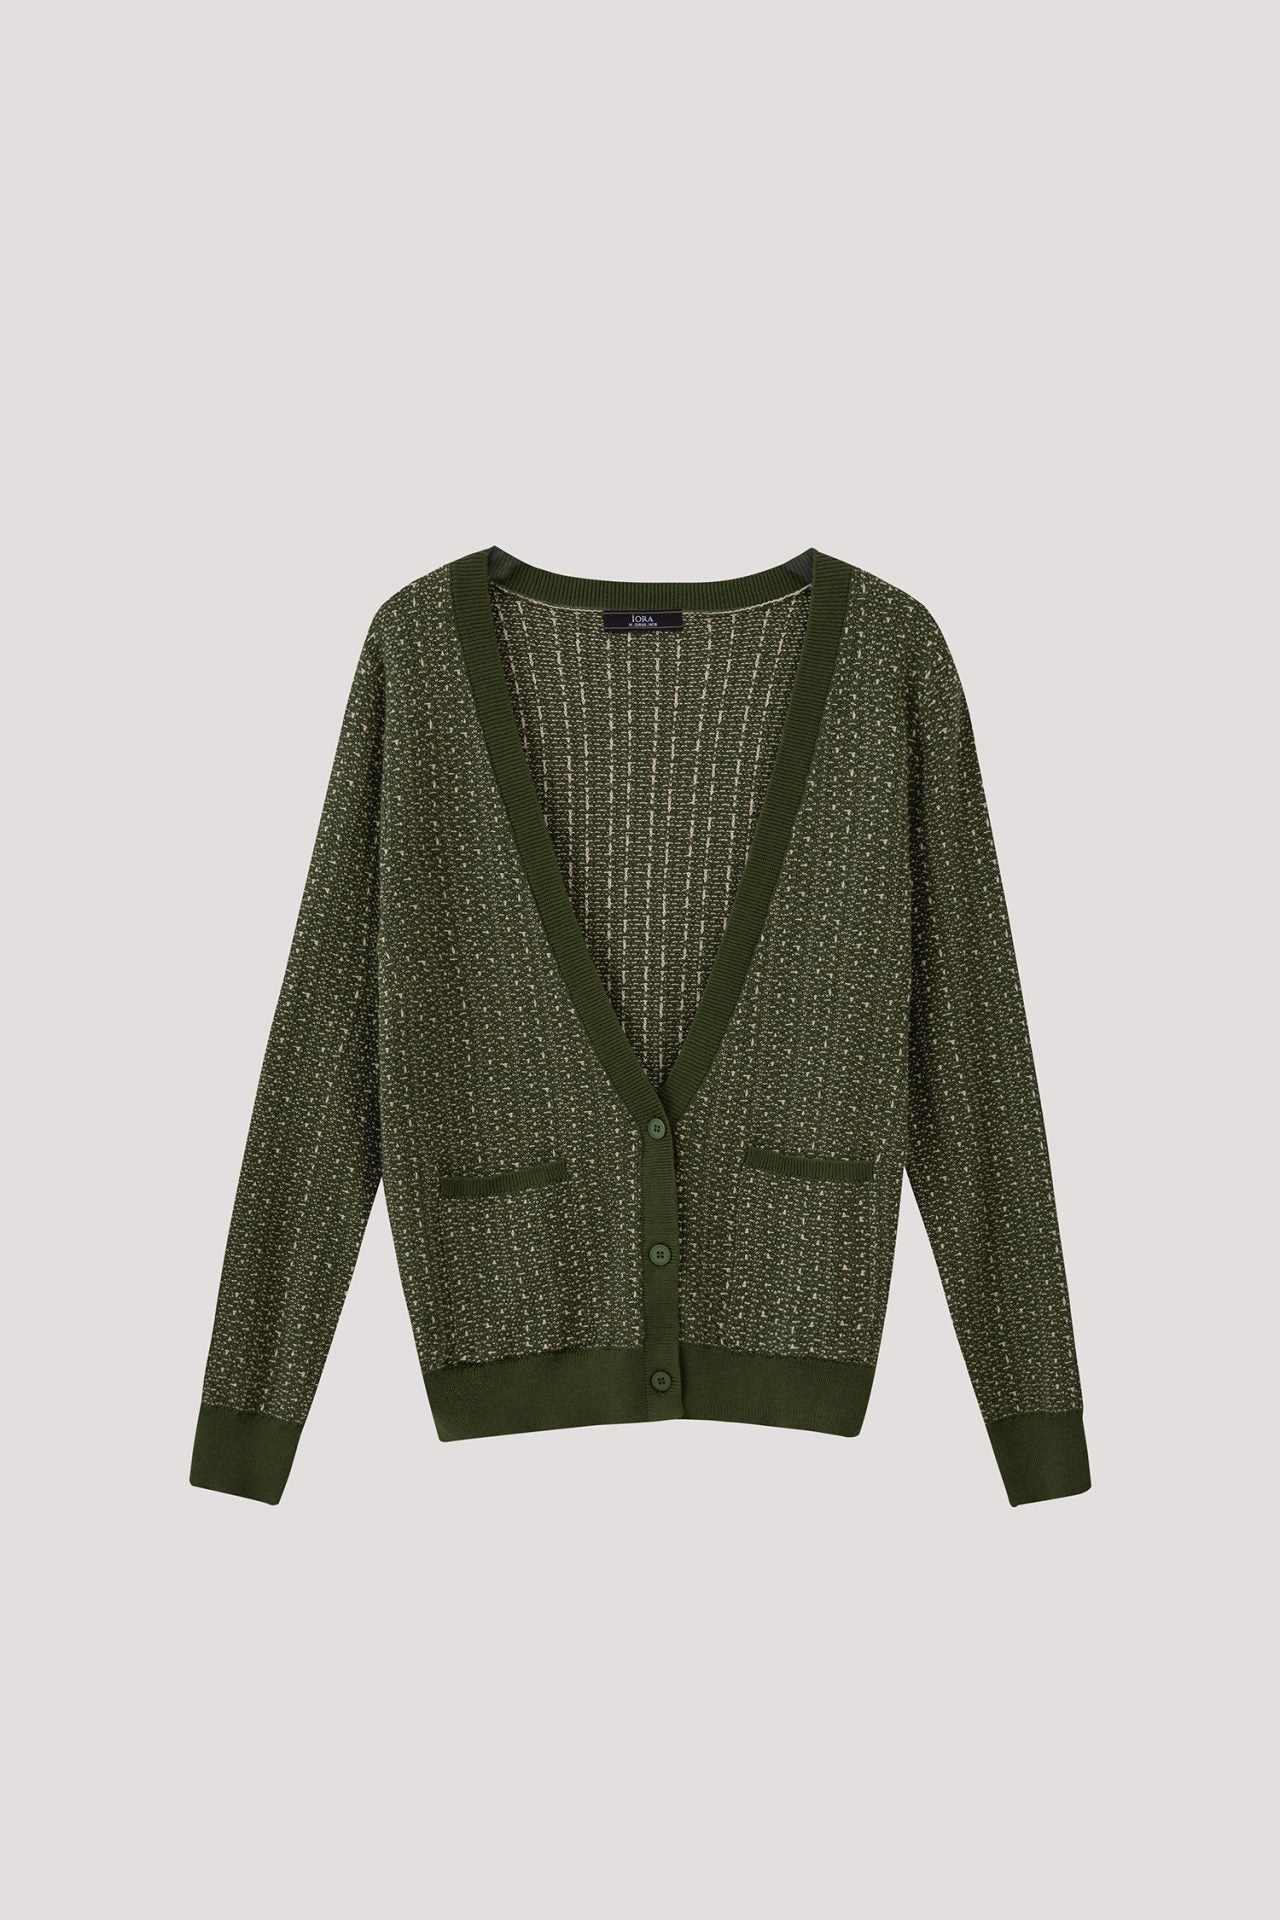 ACL 11234 CARDIGAN OLIVE